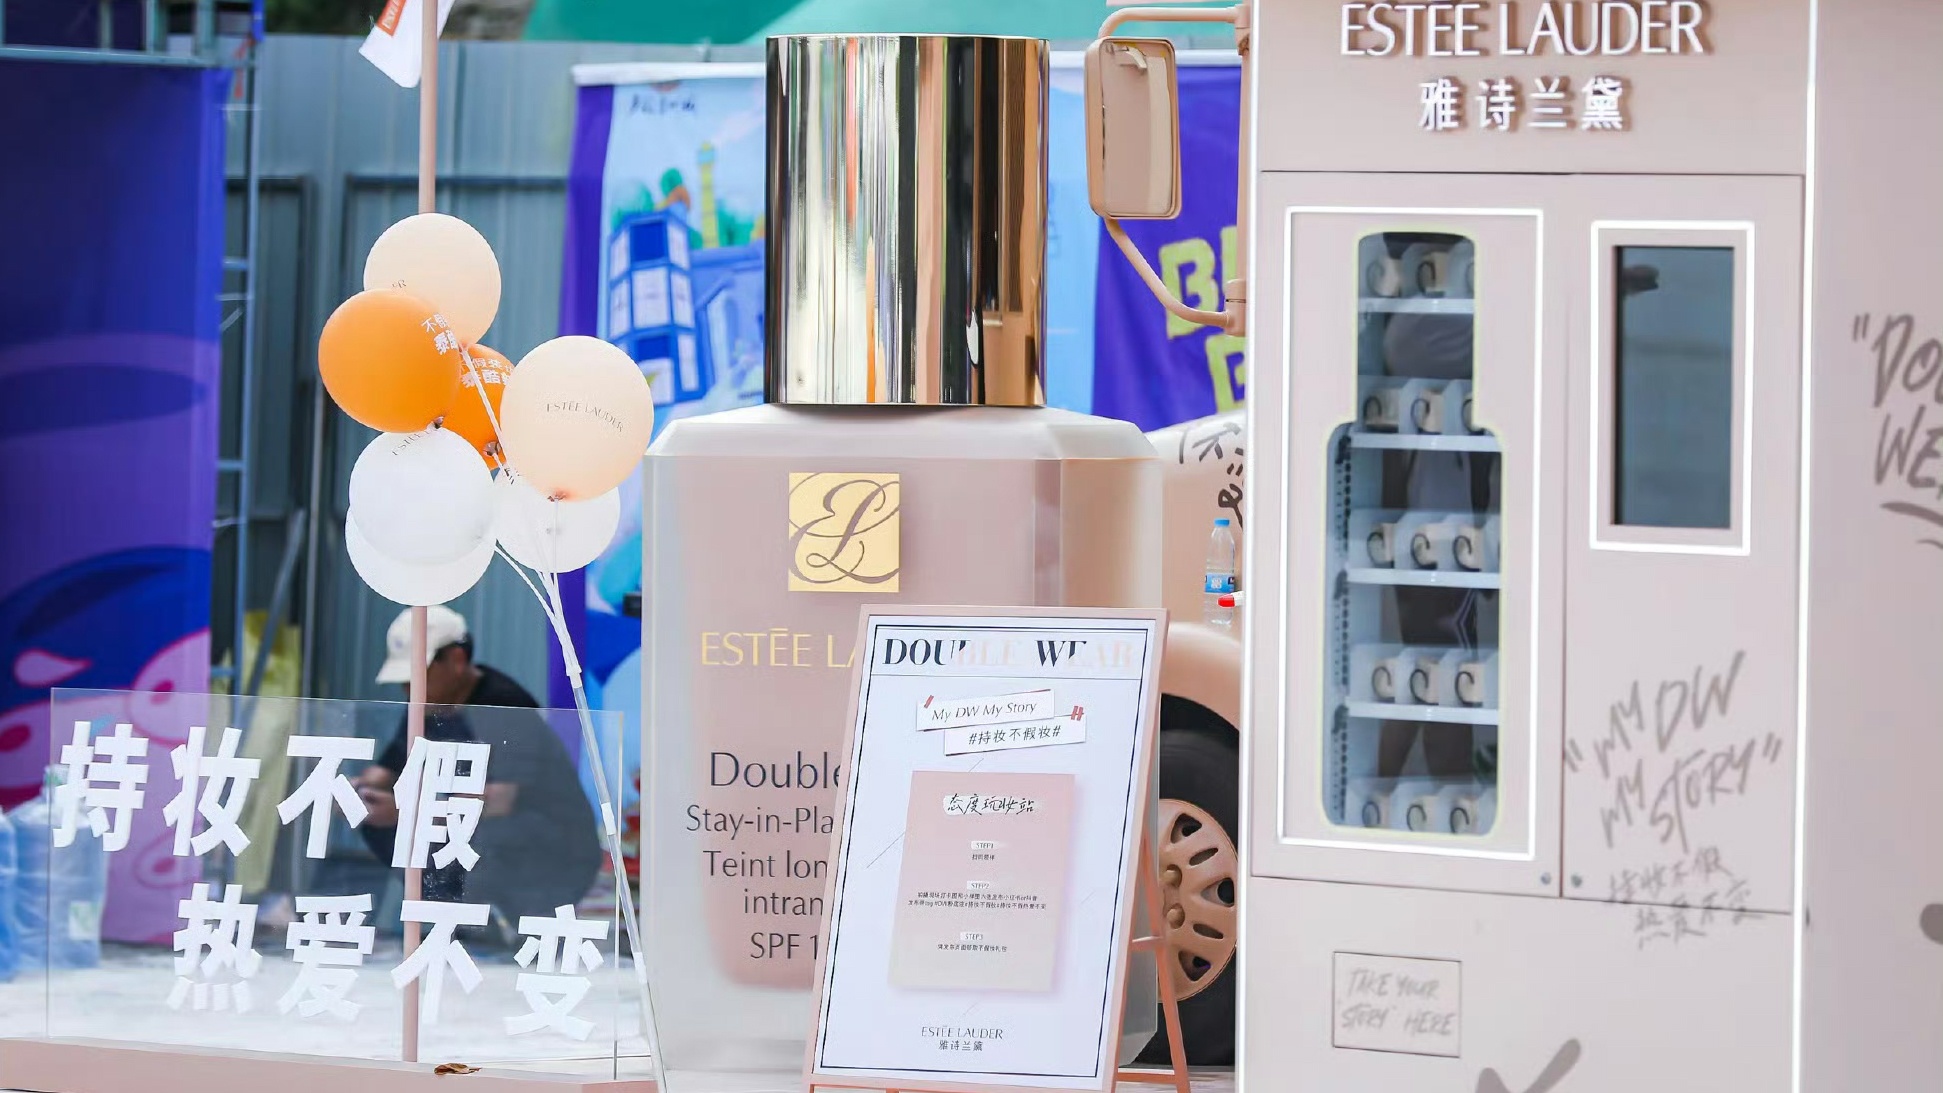 The beauty giant posted a slump in sales in its most recent earnings report, highlighting how daigou restrictions are impacting beauty — for now. Photo: Estée Lauder